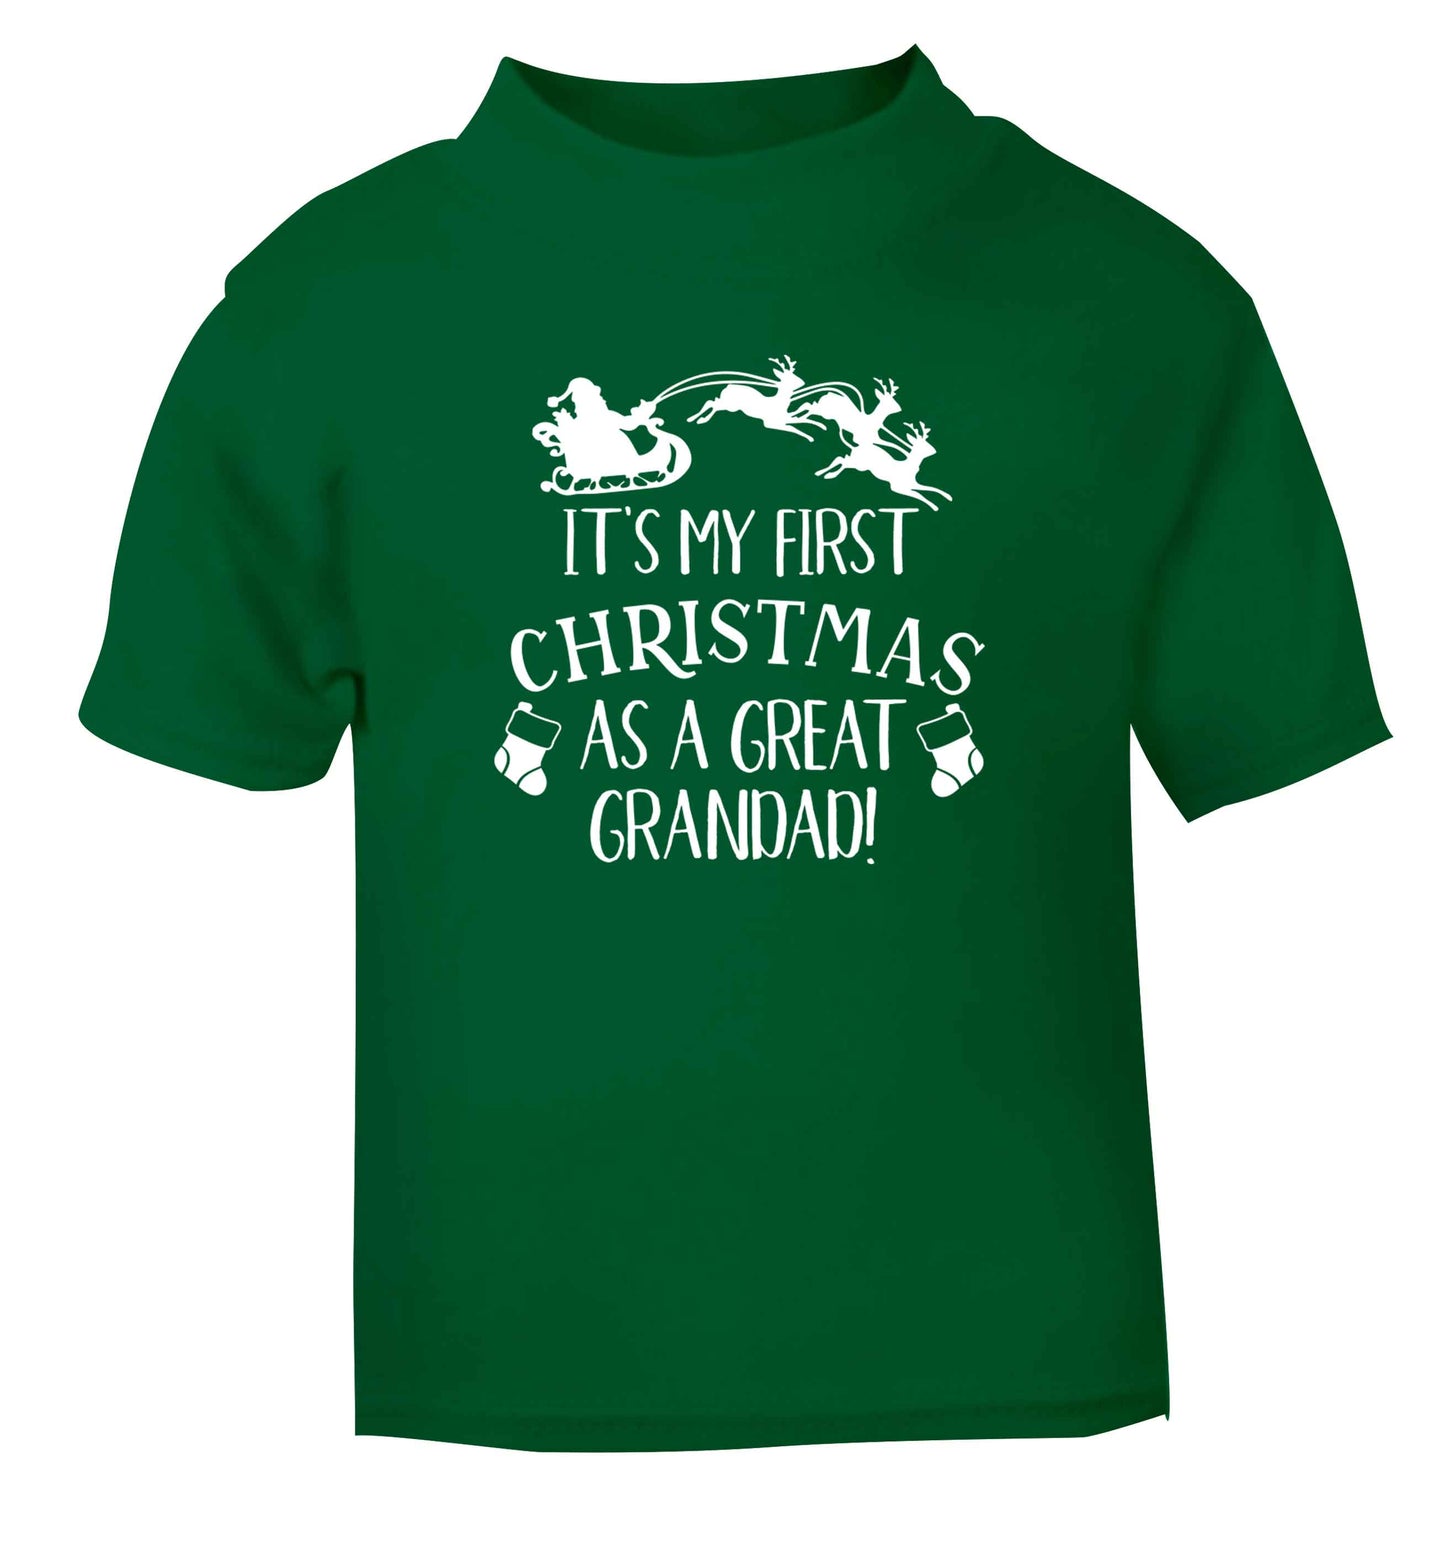 It's my first Christmas as a great grandad! green Baby Toddler Tshirt 2 Years